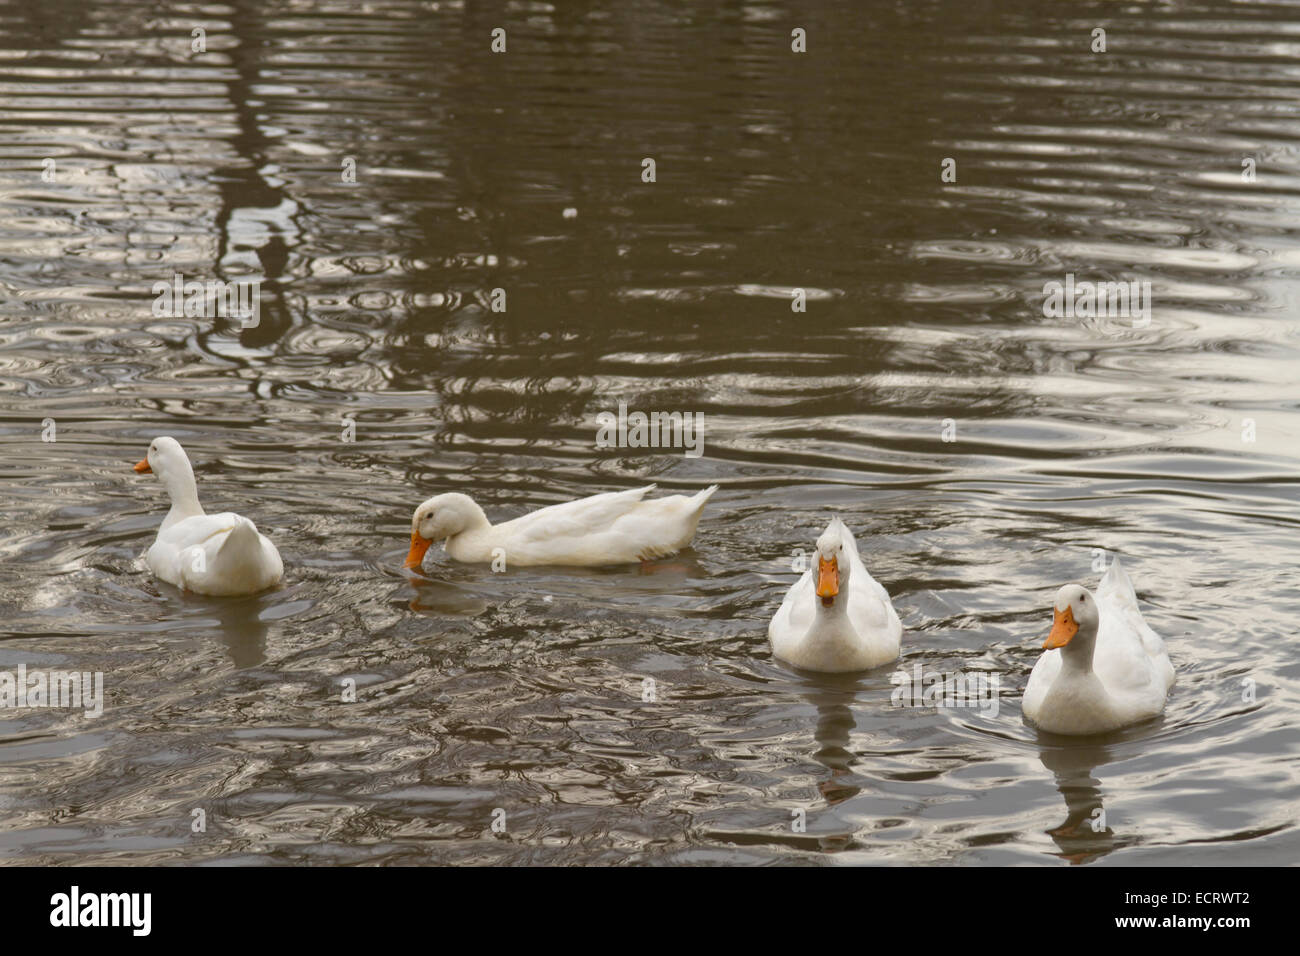 Four ducks on a lake swim among their own ripples and reflections Stock Photo